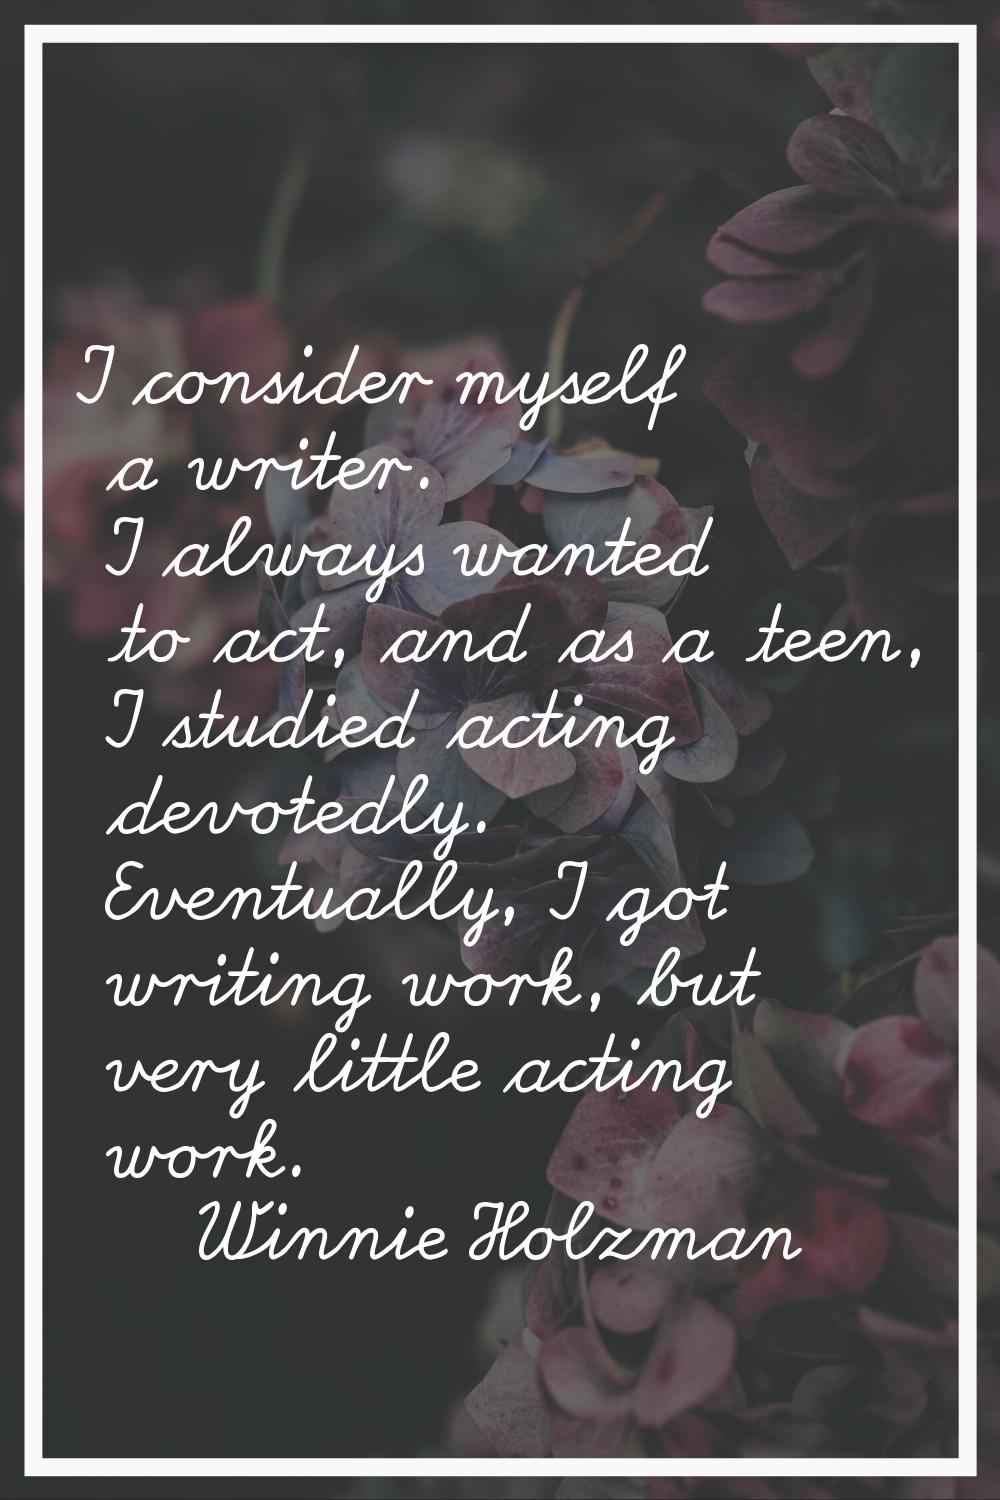 I consider myself a writer. I always wanted to act, and as a teen, I studied acting devotedly. Even